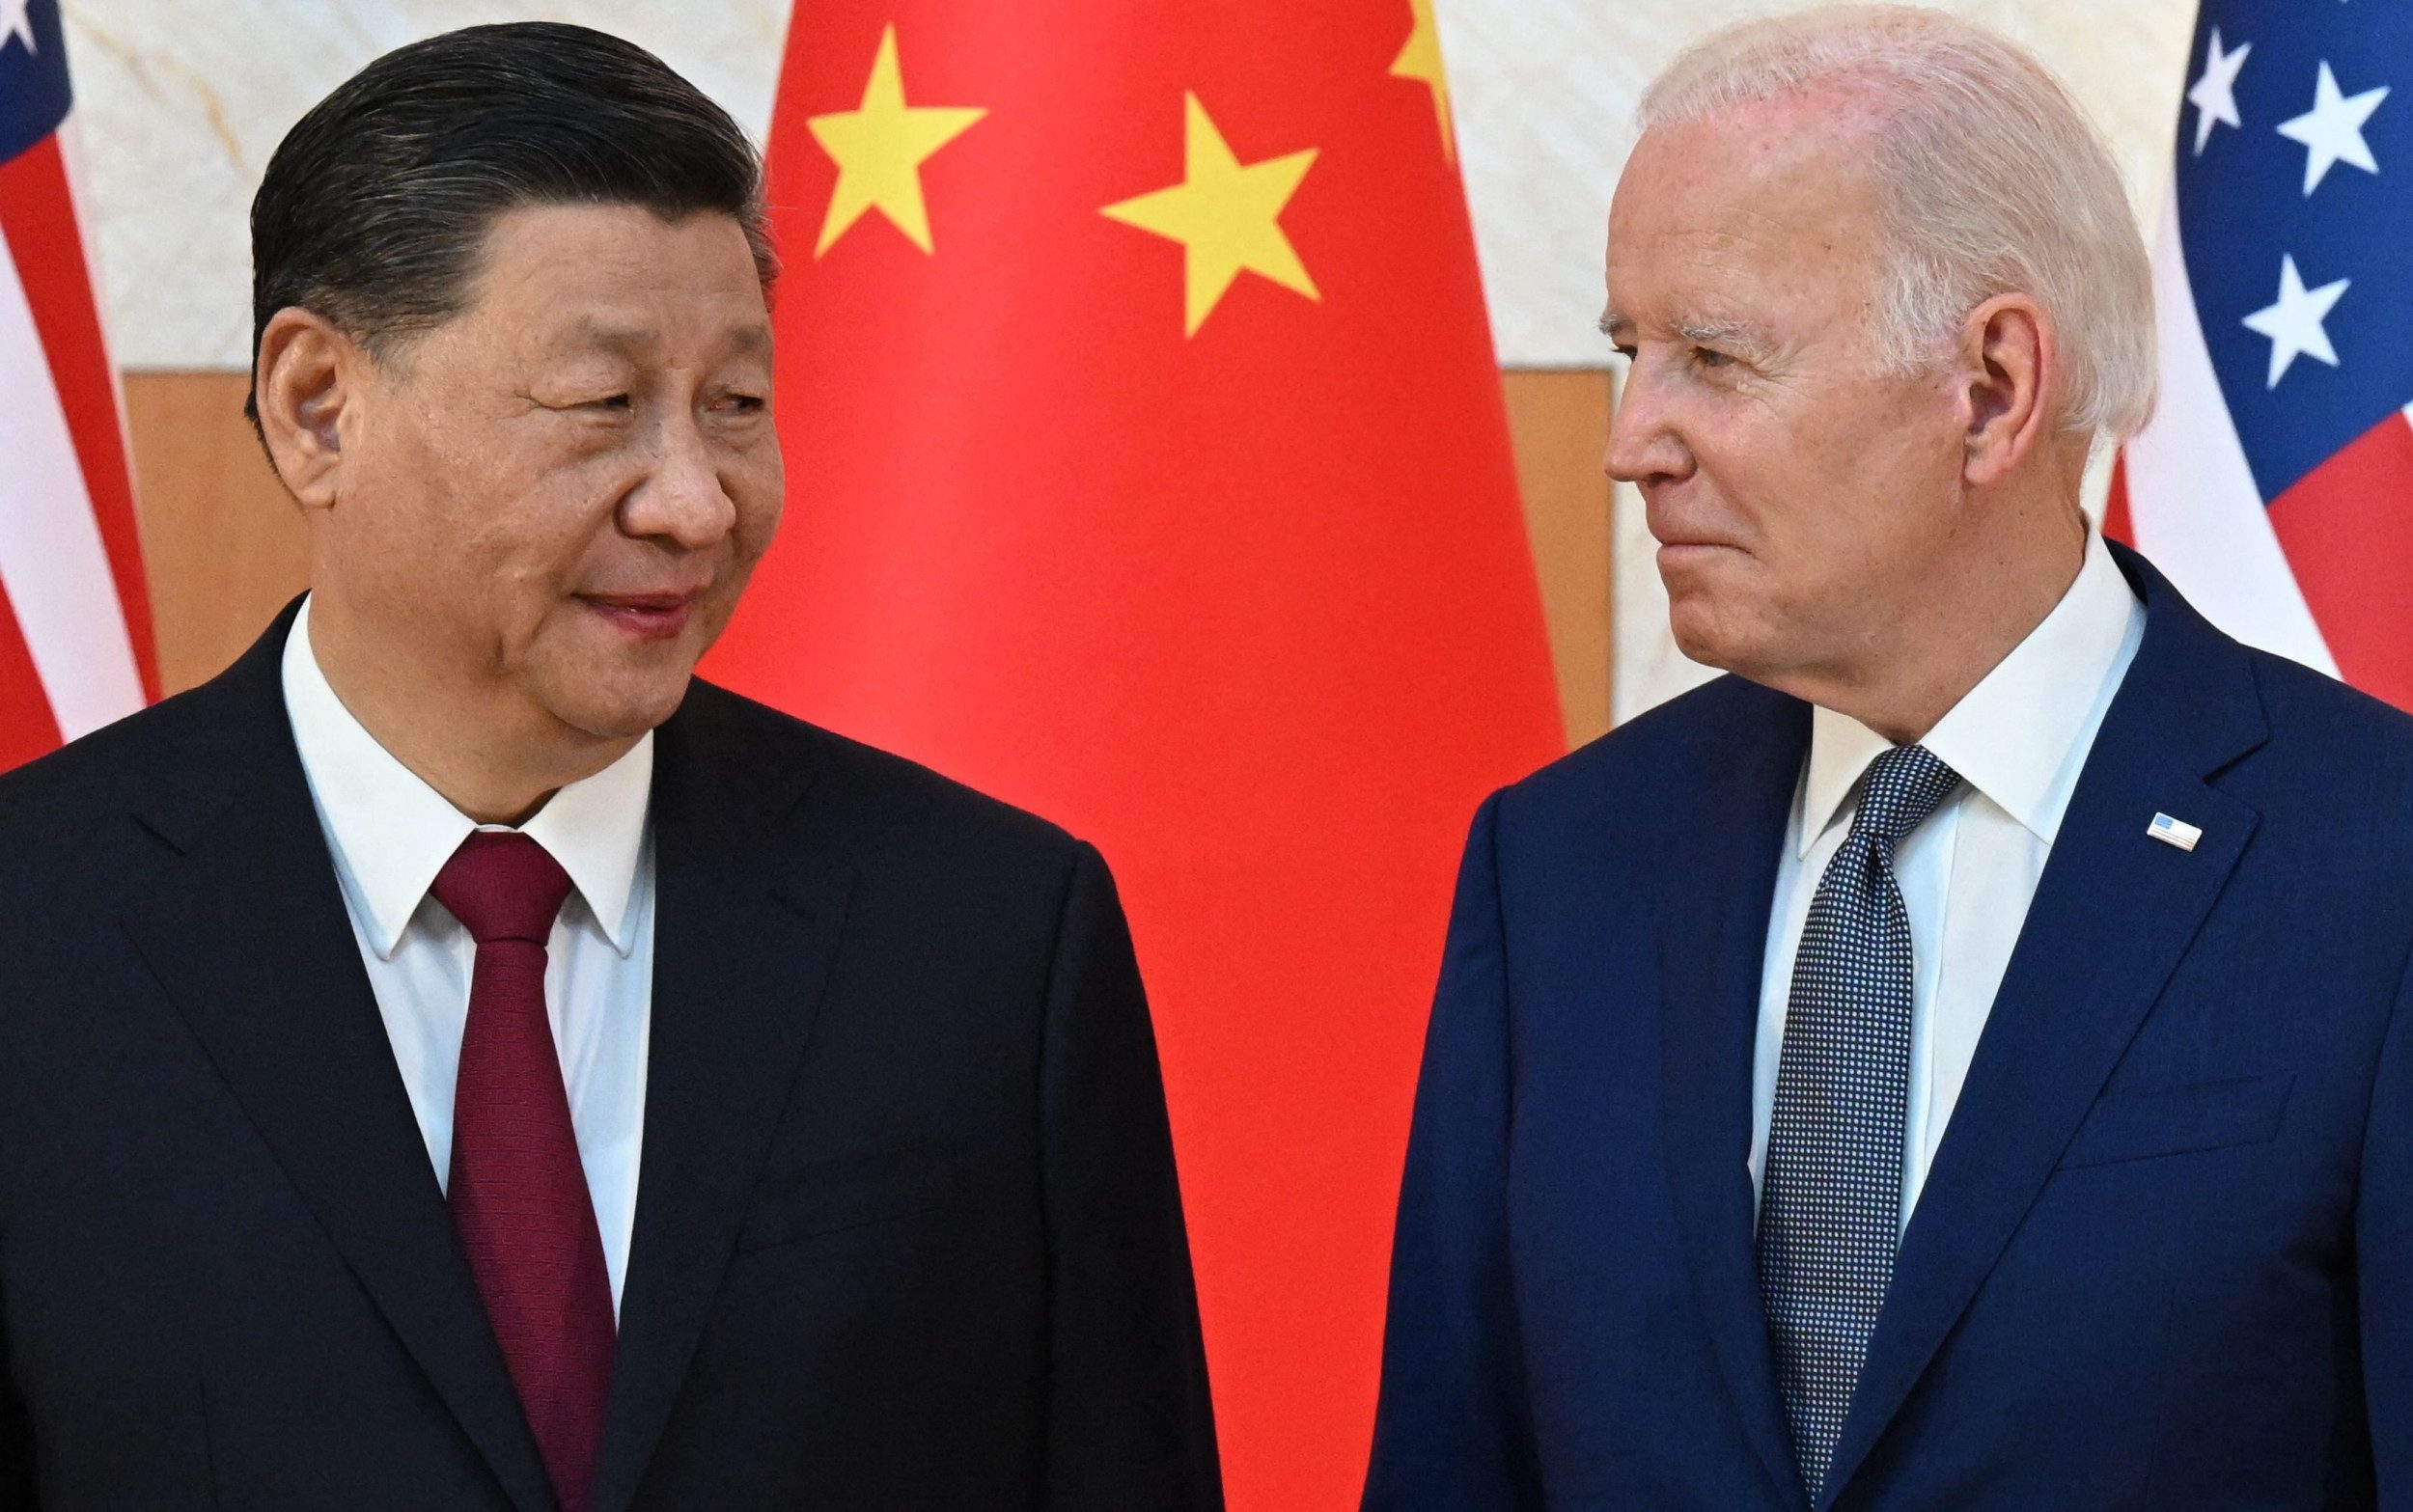 Biden Says China Has ‘Real Problems’, Cites President Xi As Example